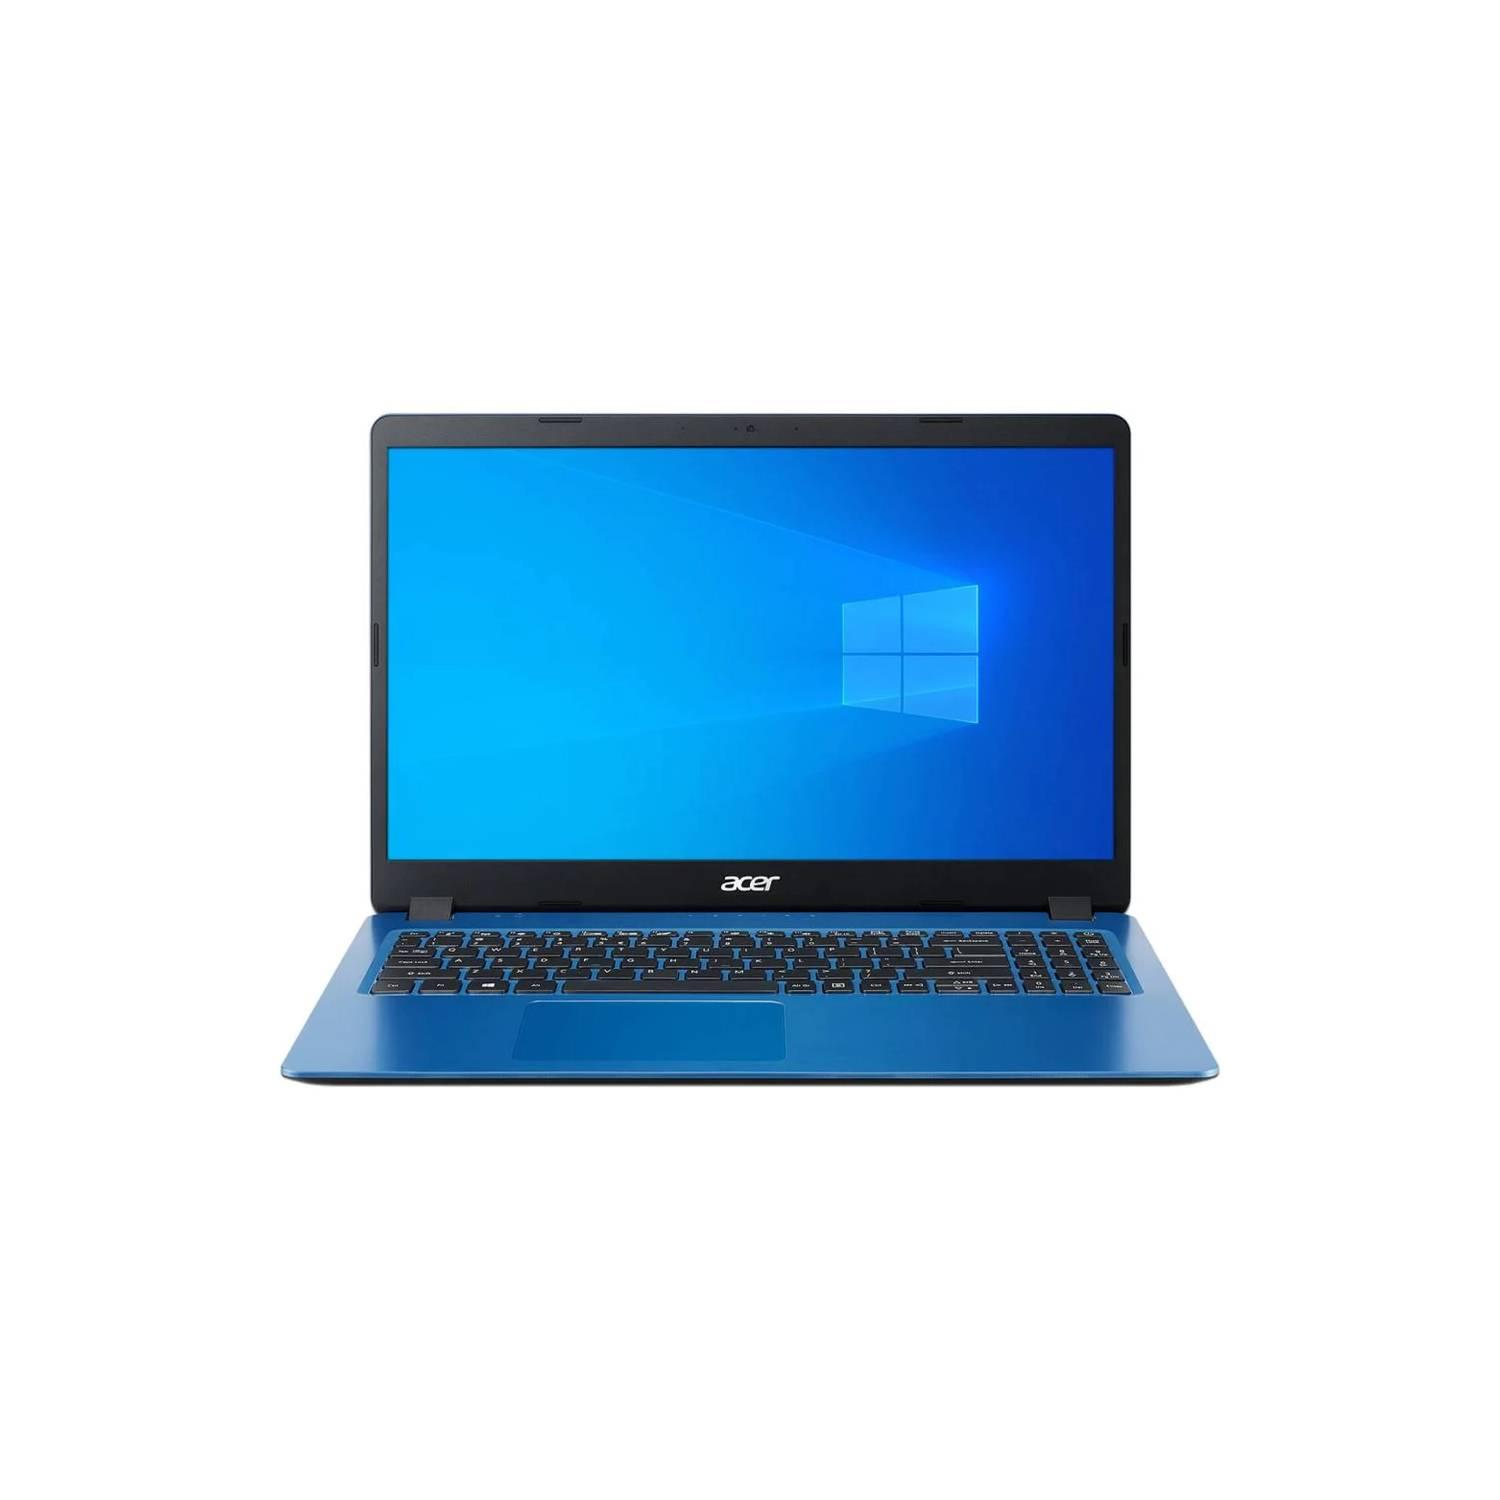 Selected image for ACER Лаптоп  Aspire 3 (A315-56-35XL), Blue, 15.6" FHD (1920 x 1080) i3-1005G1,R